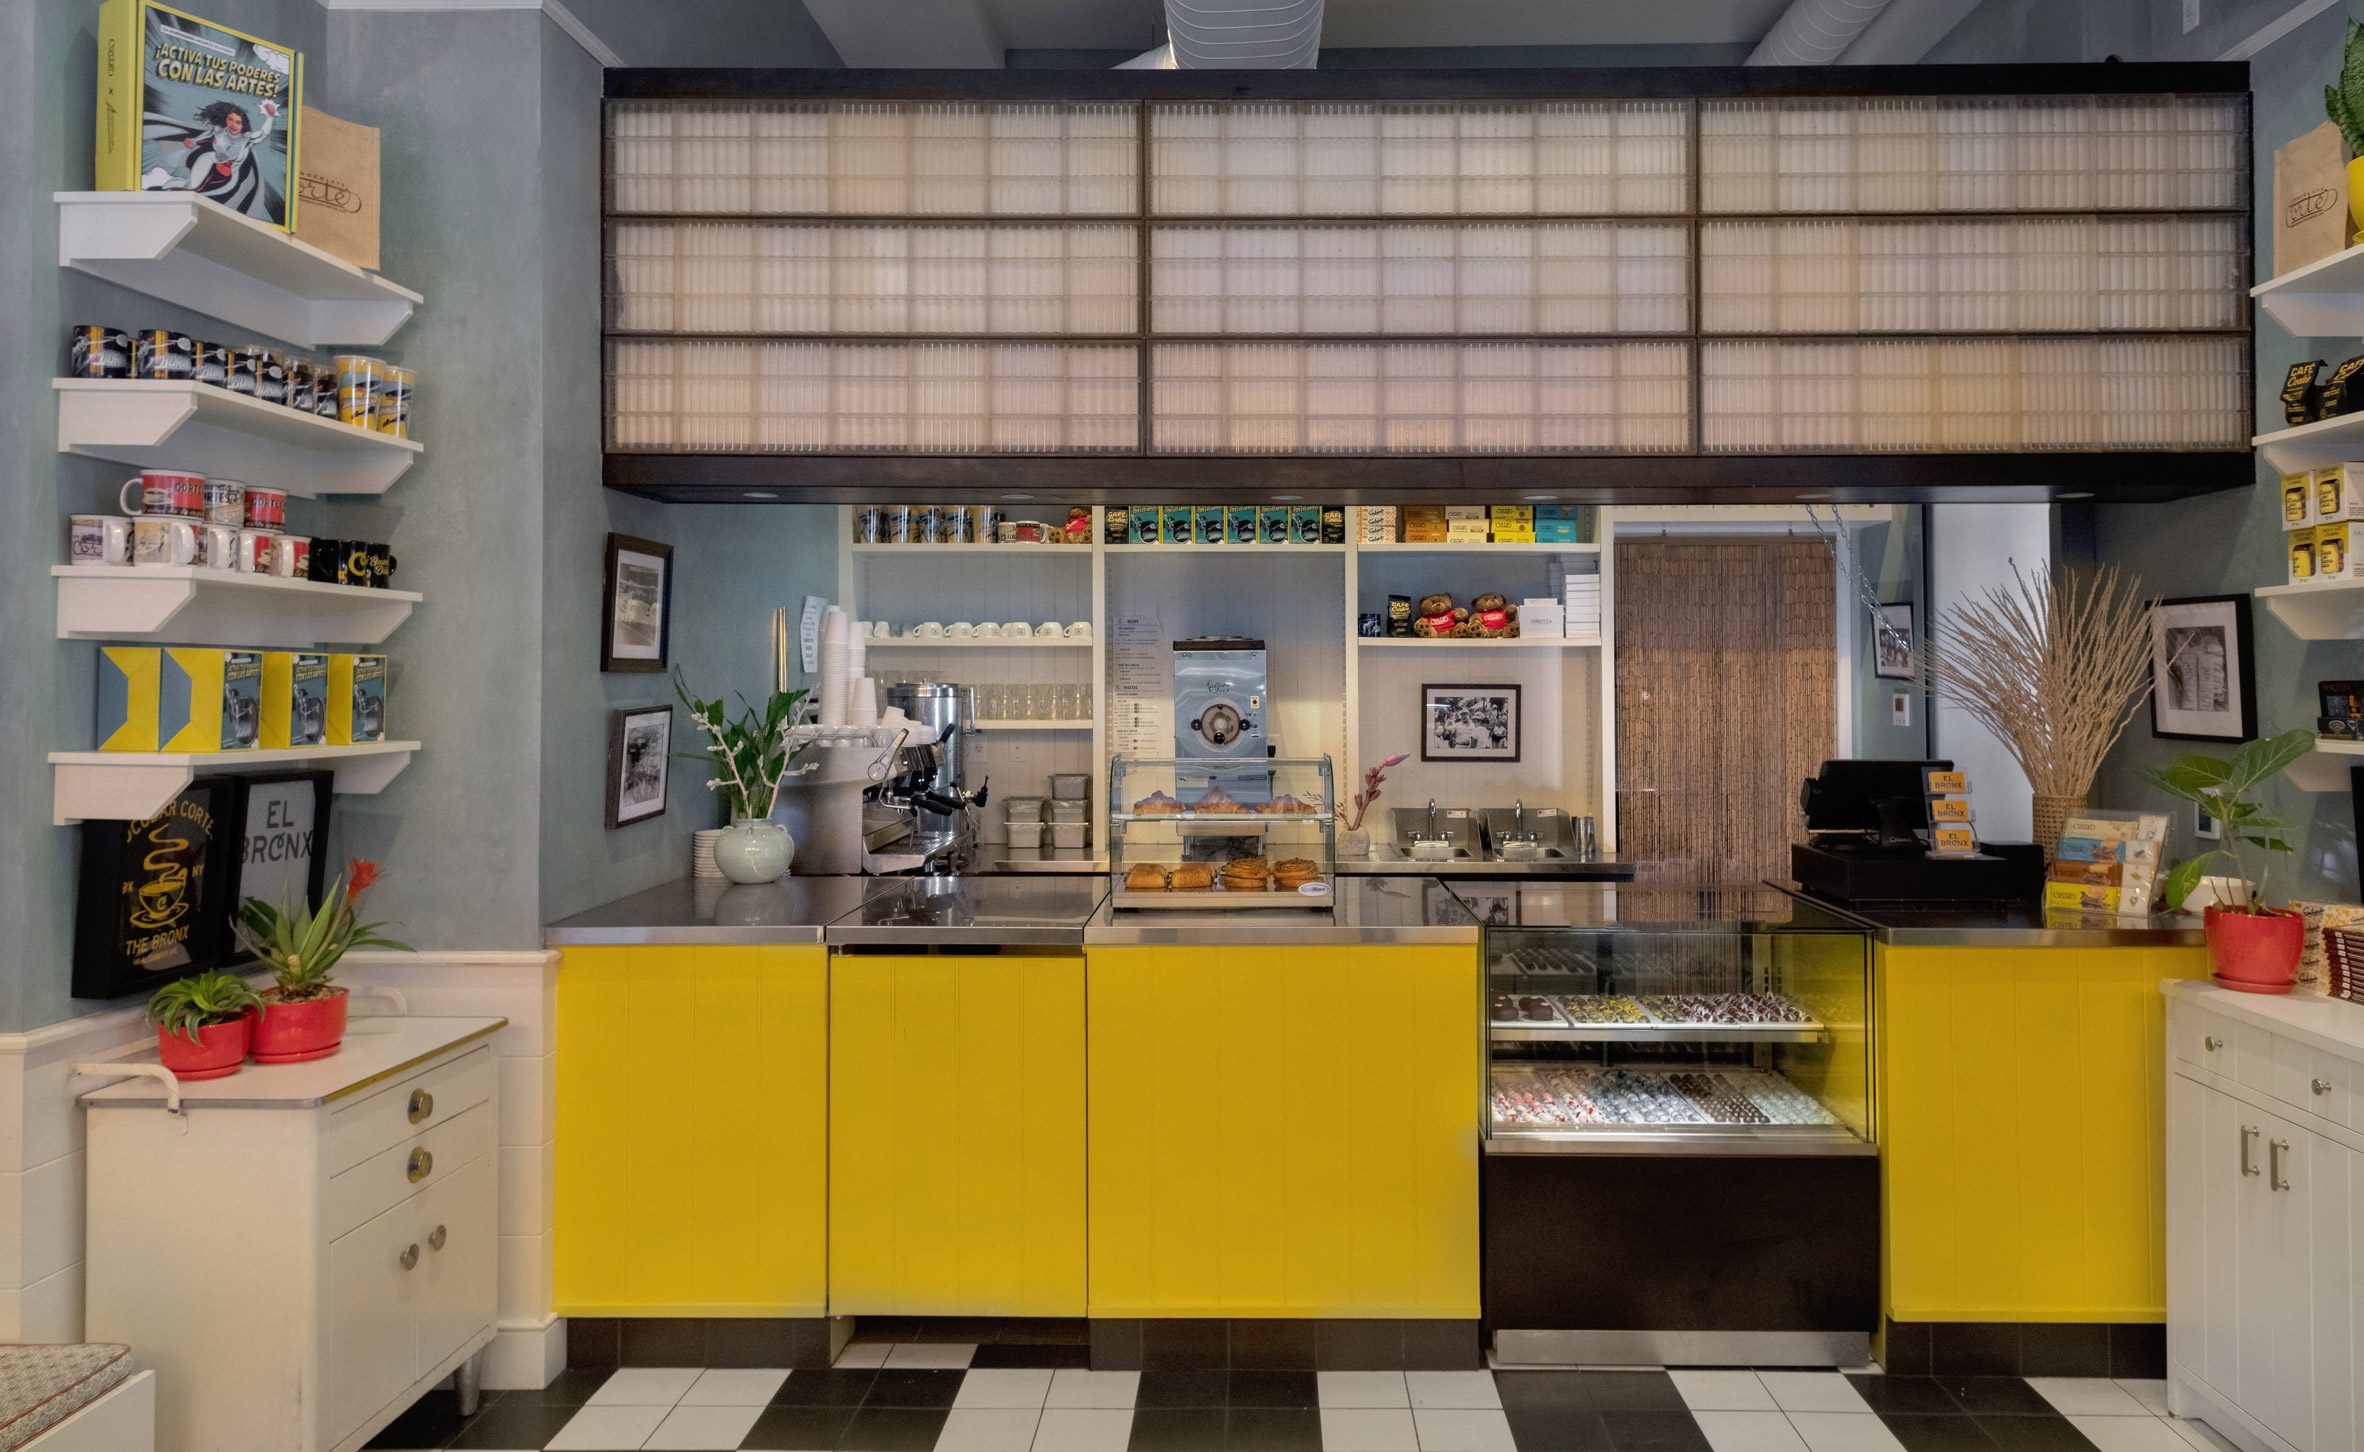 Yellow cafe counter with chocolate moulds installed above